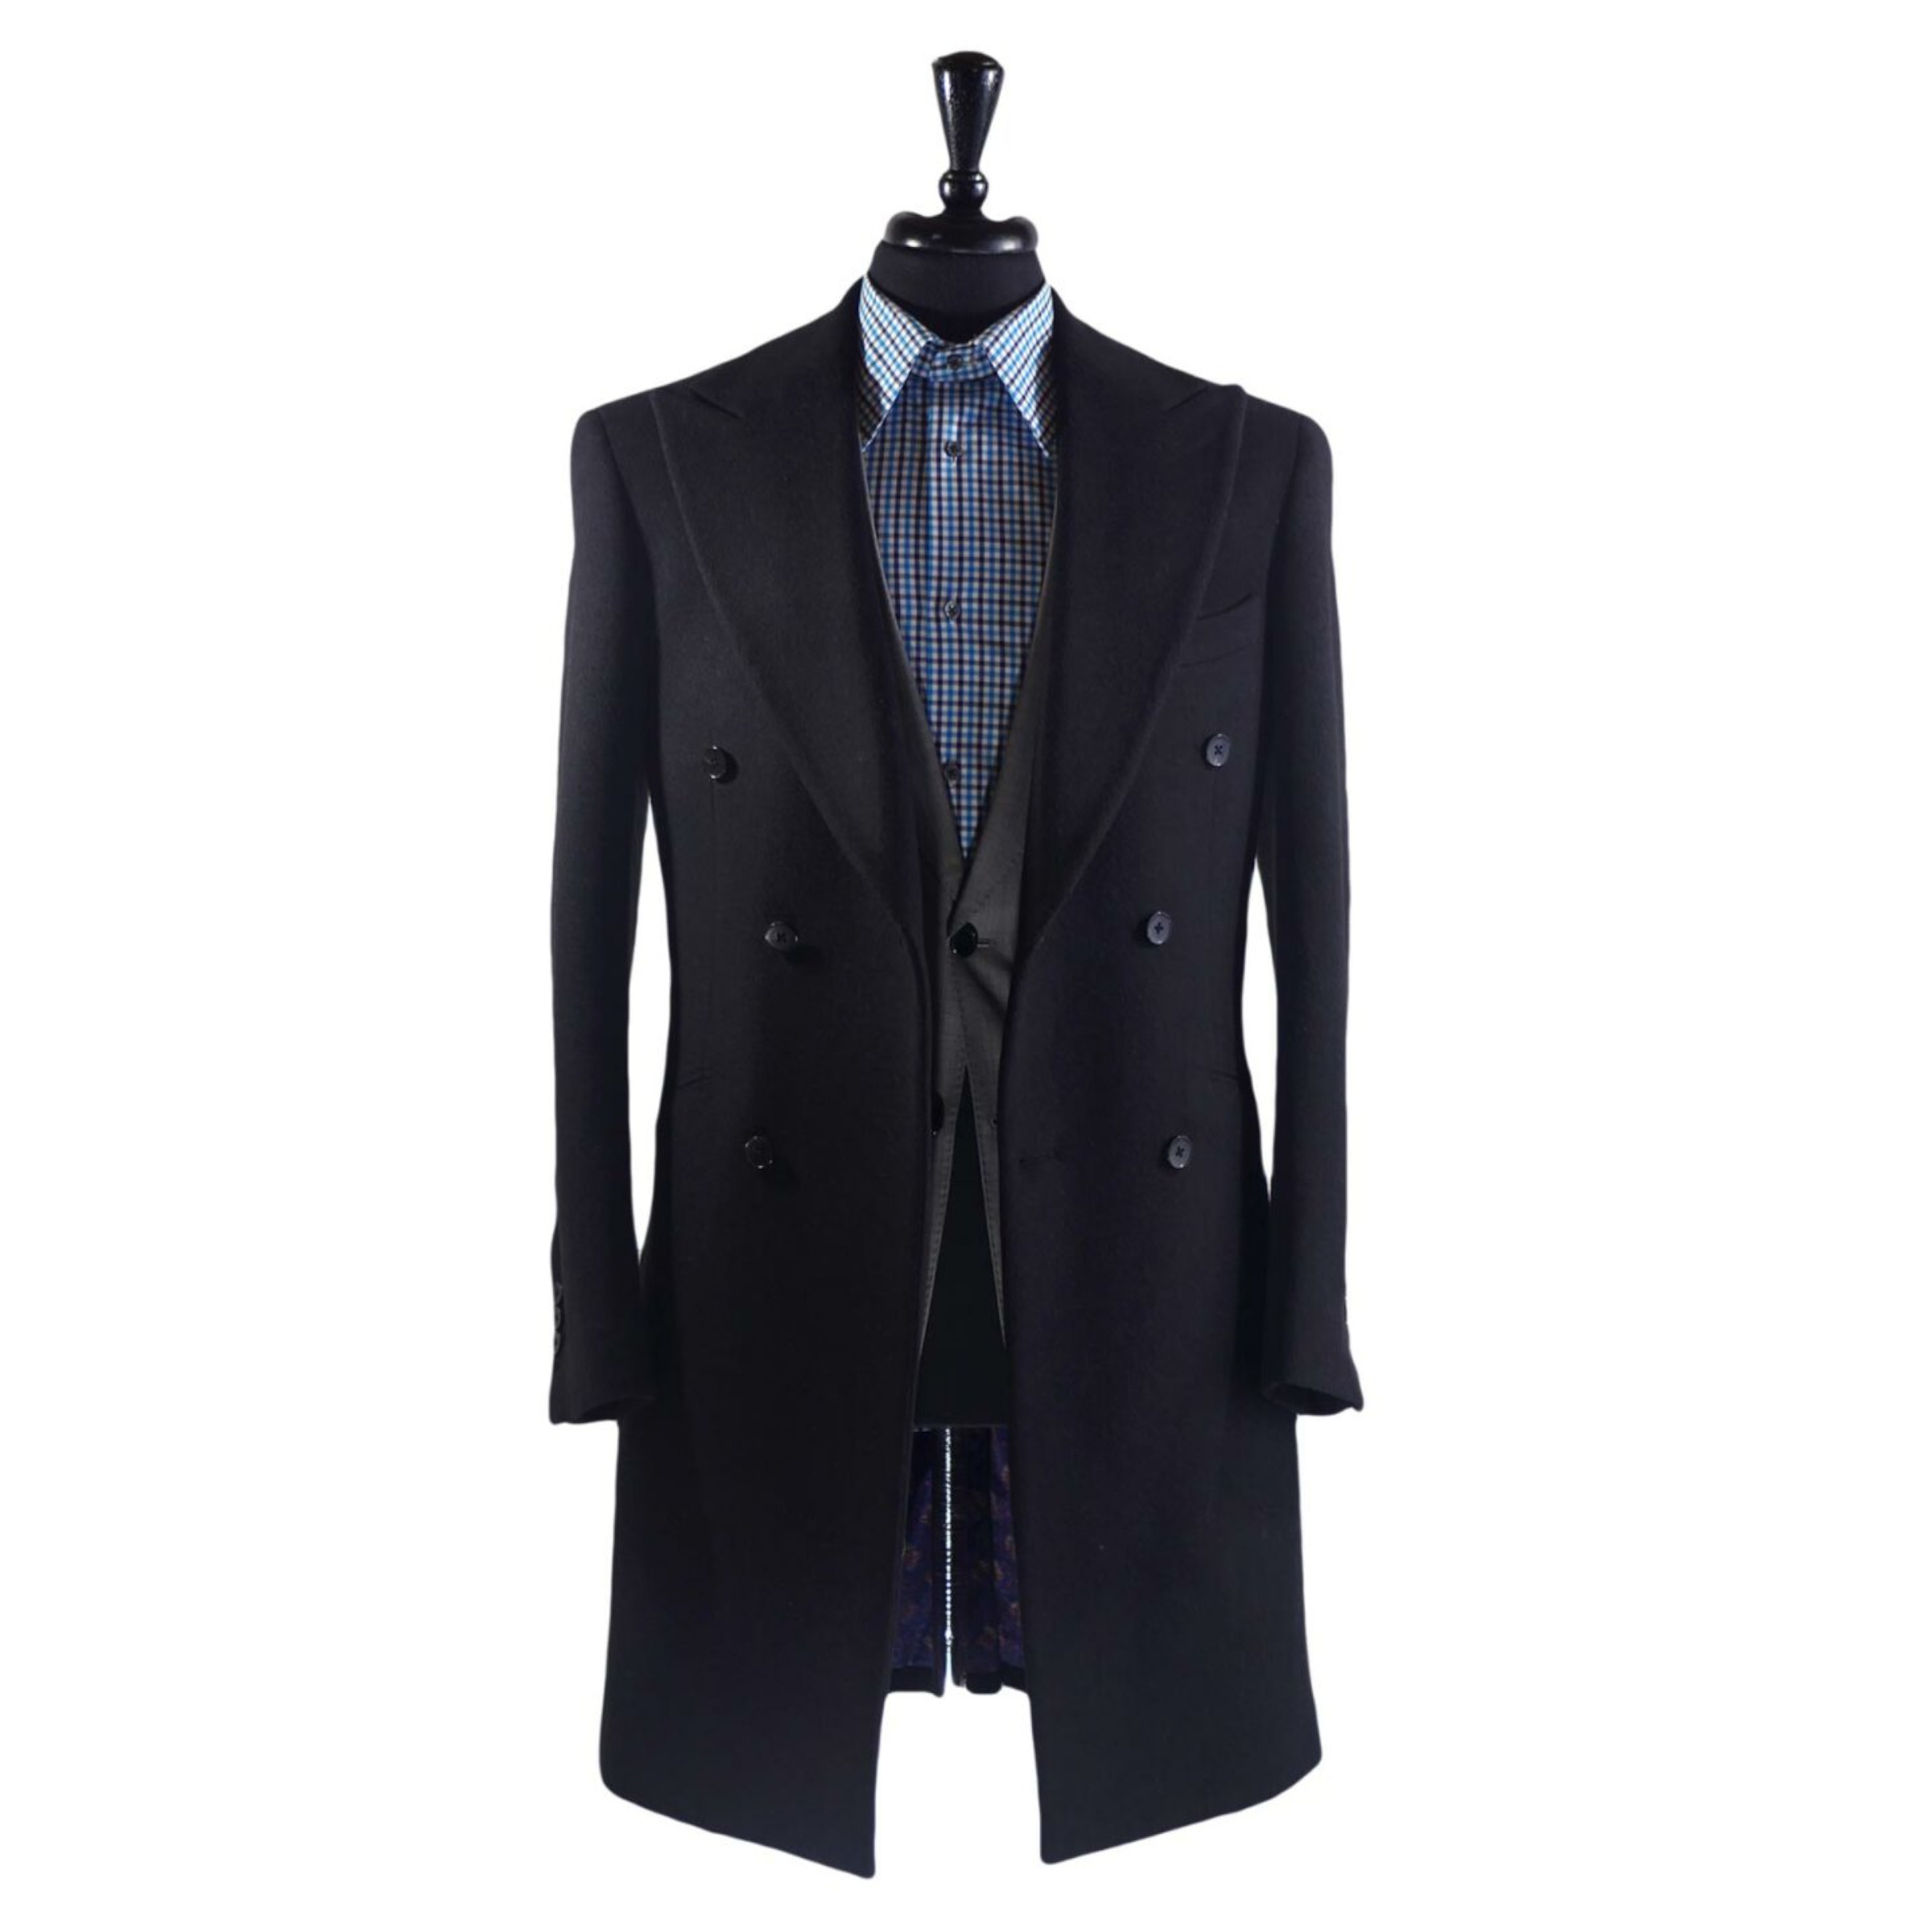 Overcoats - Churchill Classic. A black knee length overcoat on a body form with a blue checkered shirt on a white background